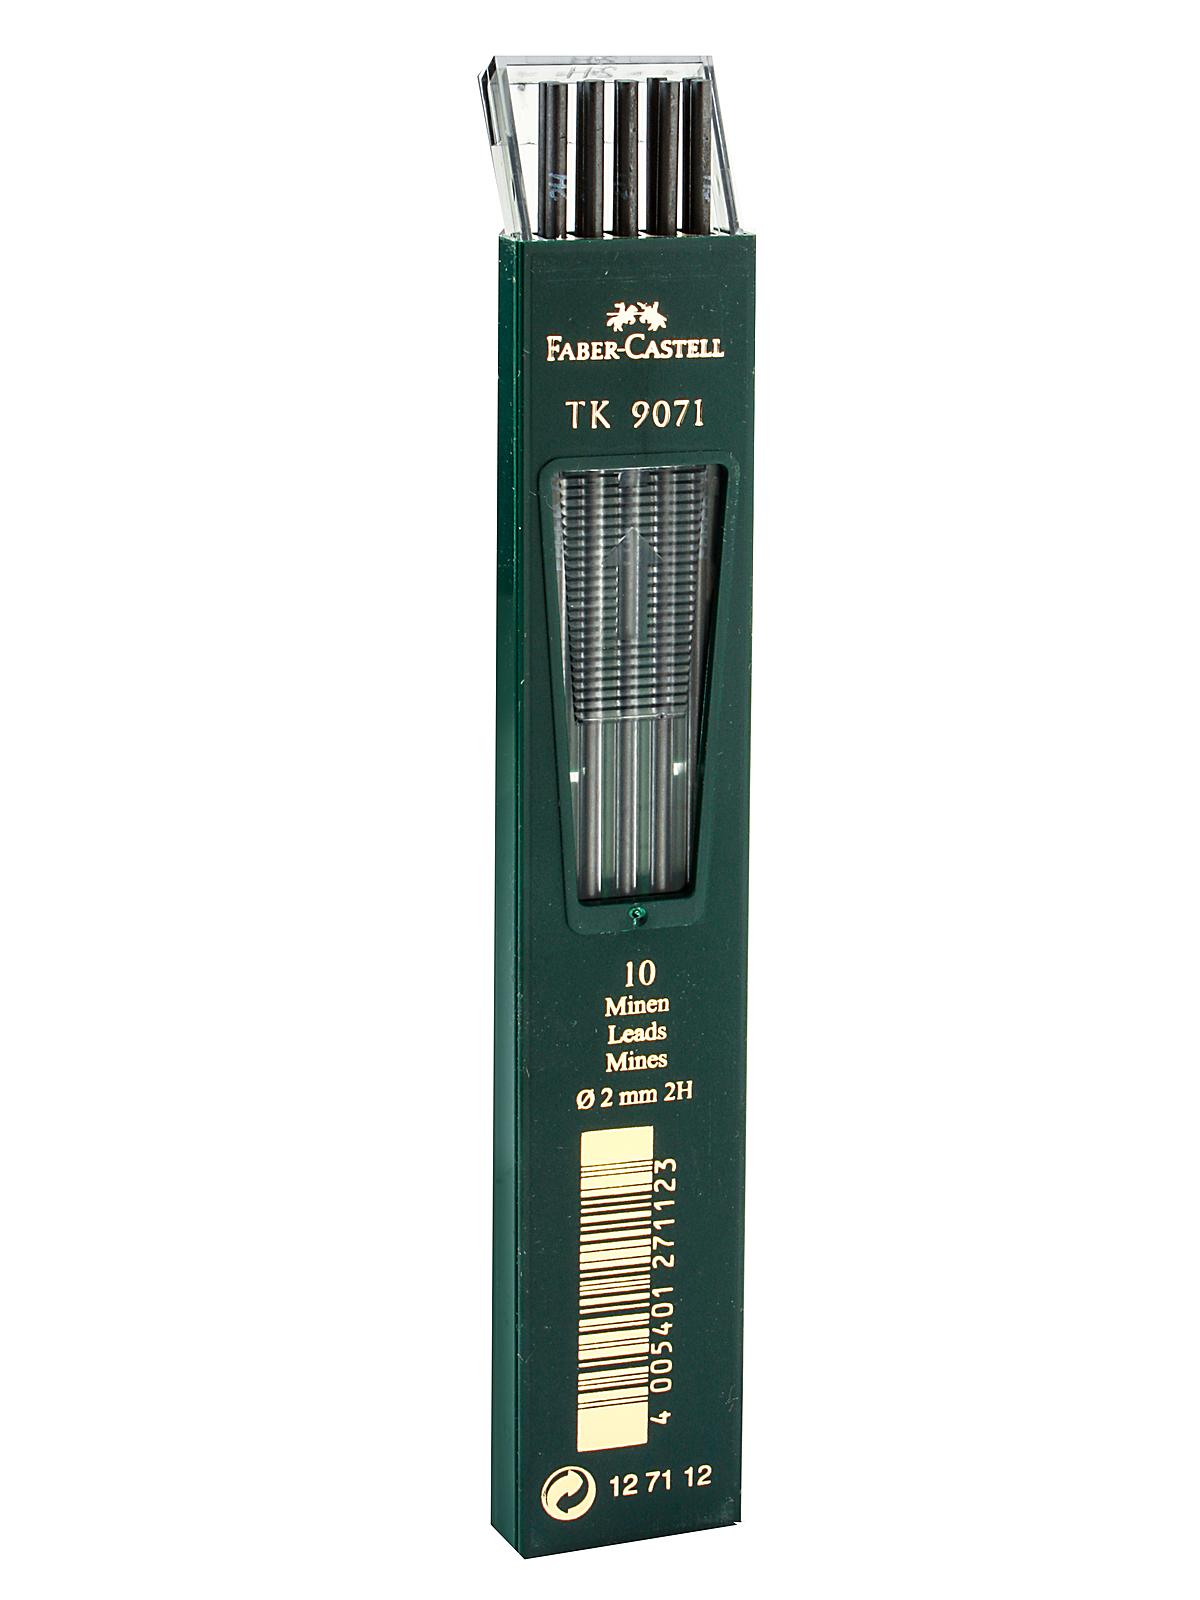 TK 9400 Clutch Drawing Pencil Leads 2H Pack Of 10